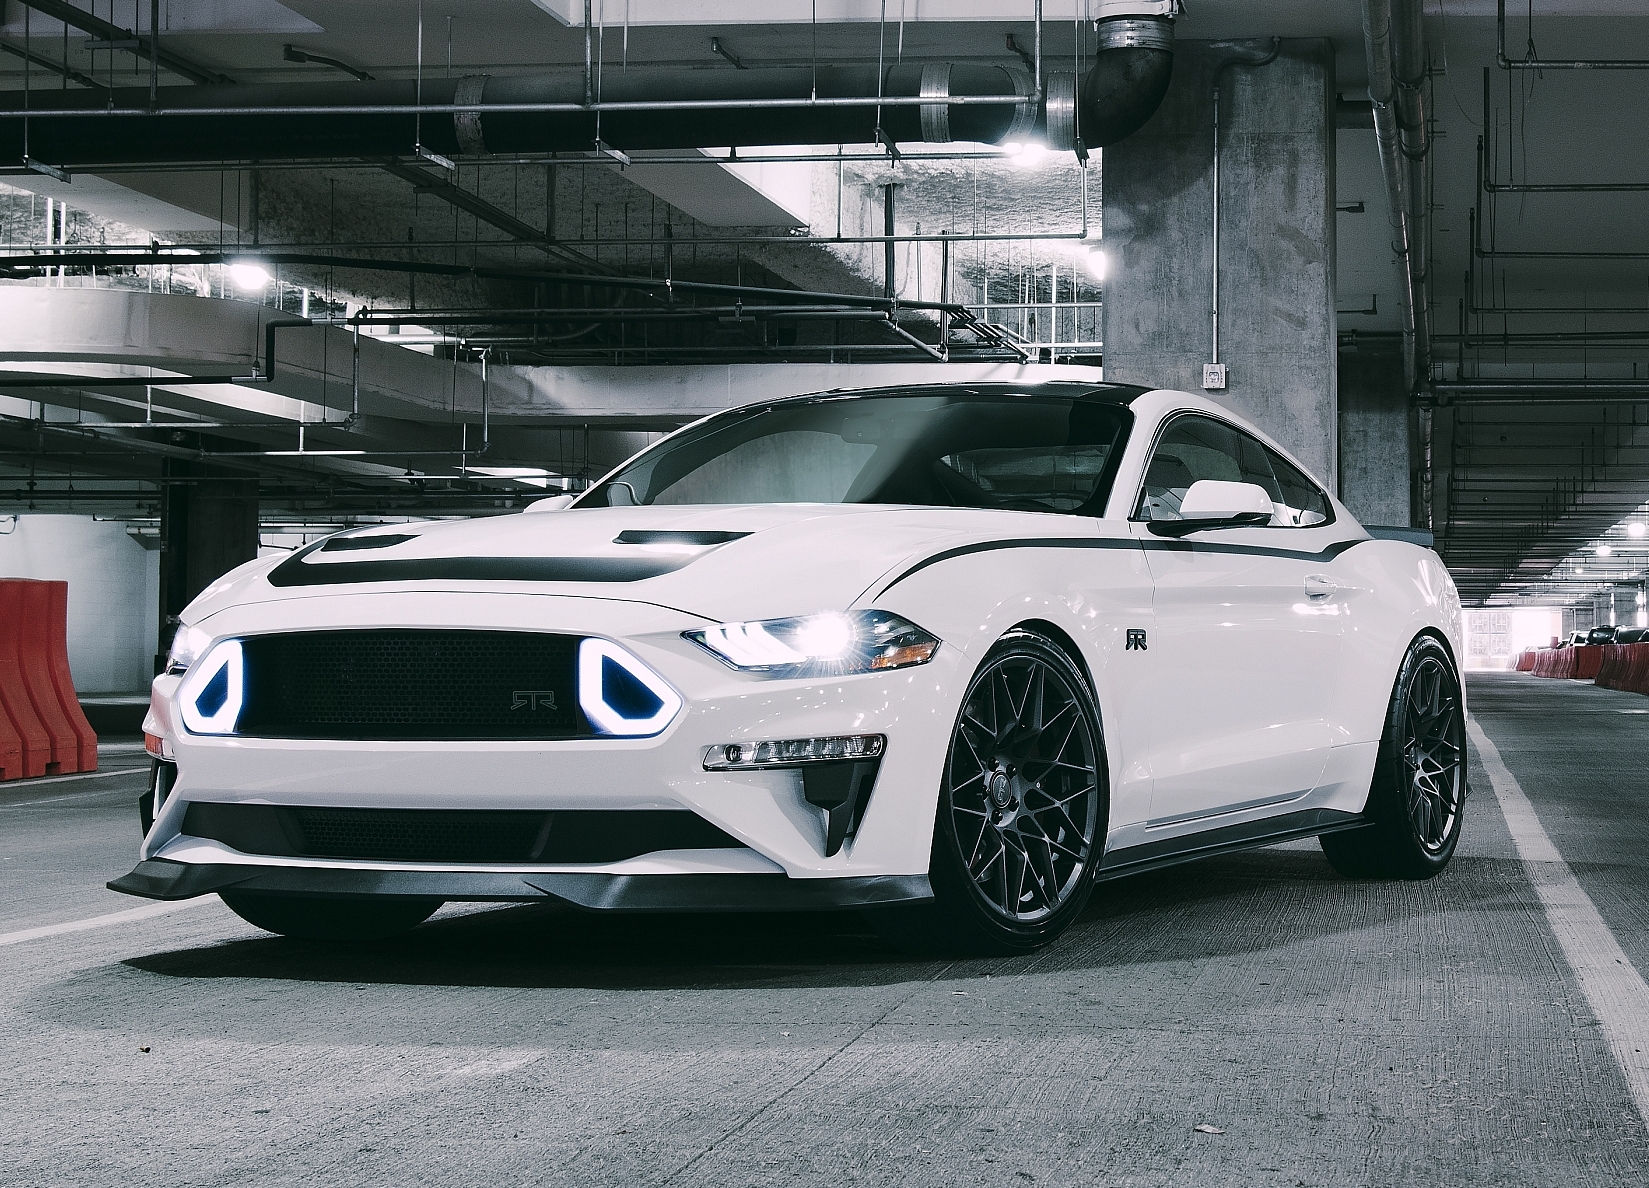 2018 Ford Mustang RTR revealed